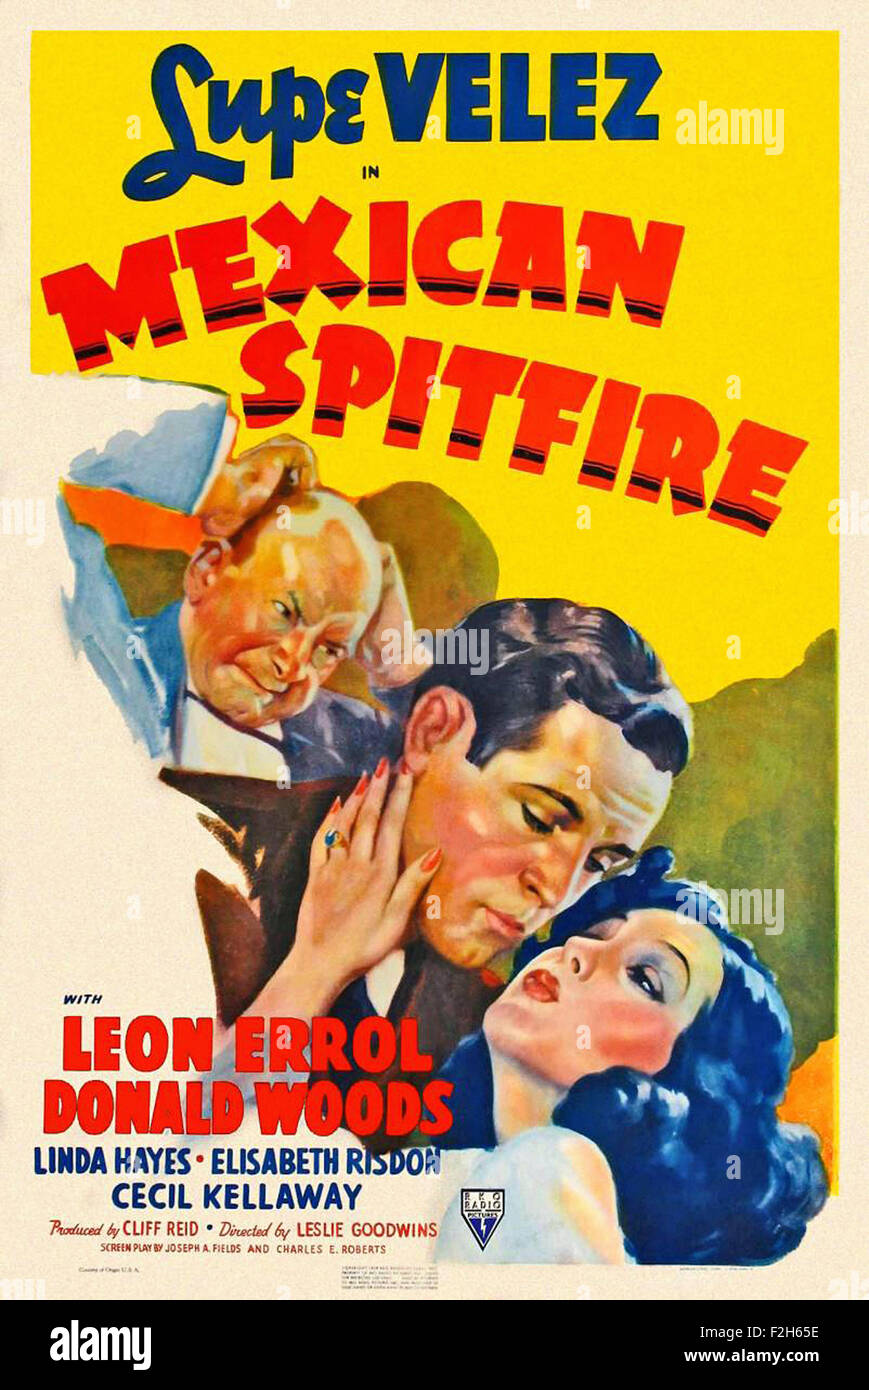 Mexican Spitfire 01 - Movie Poster Stock Photo